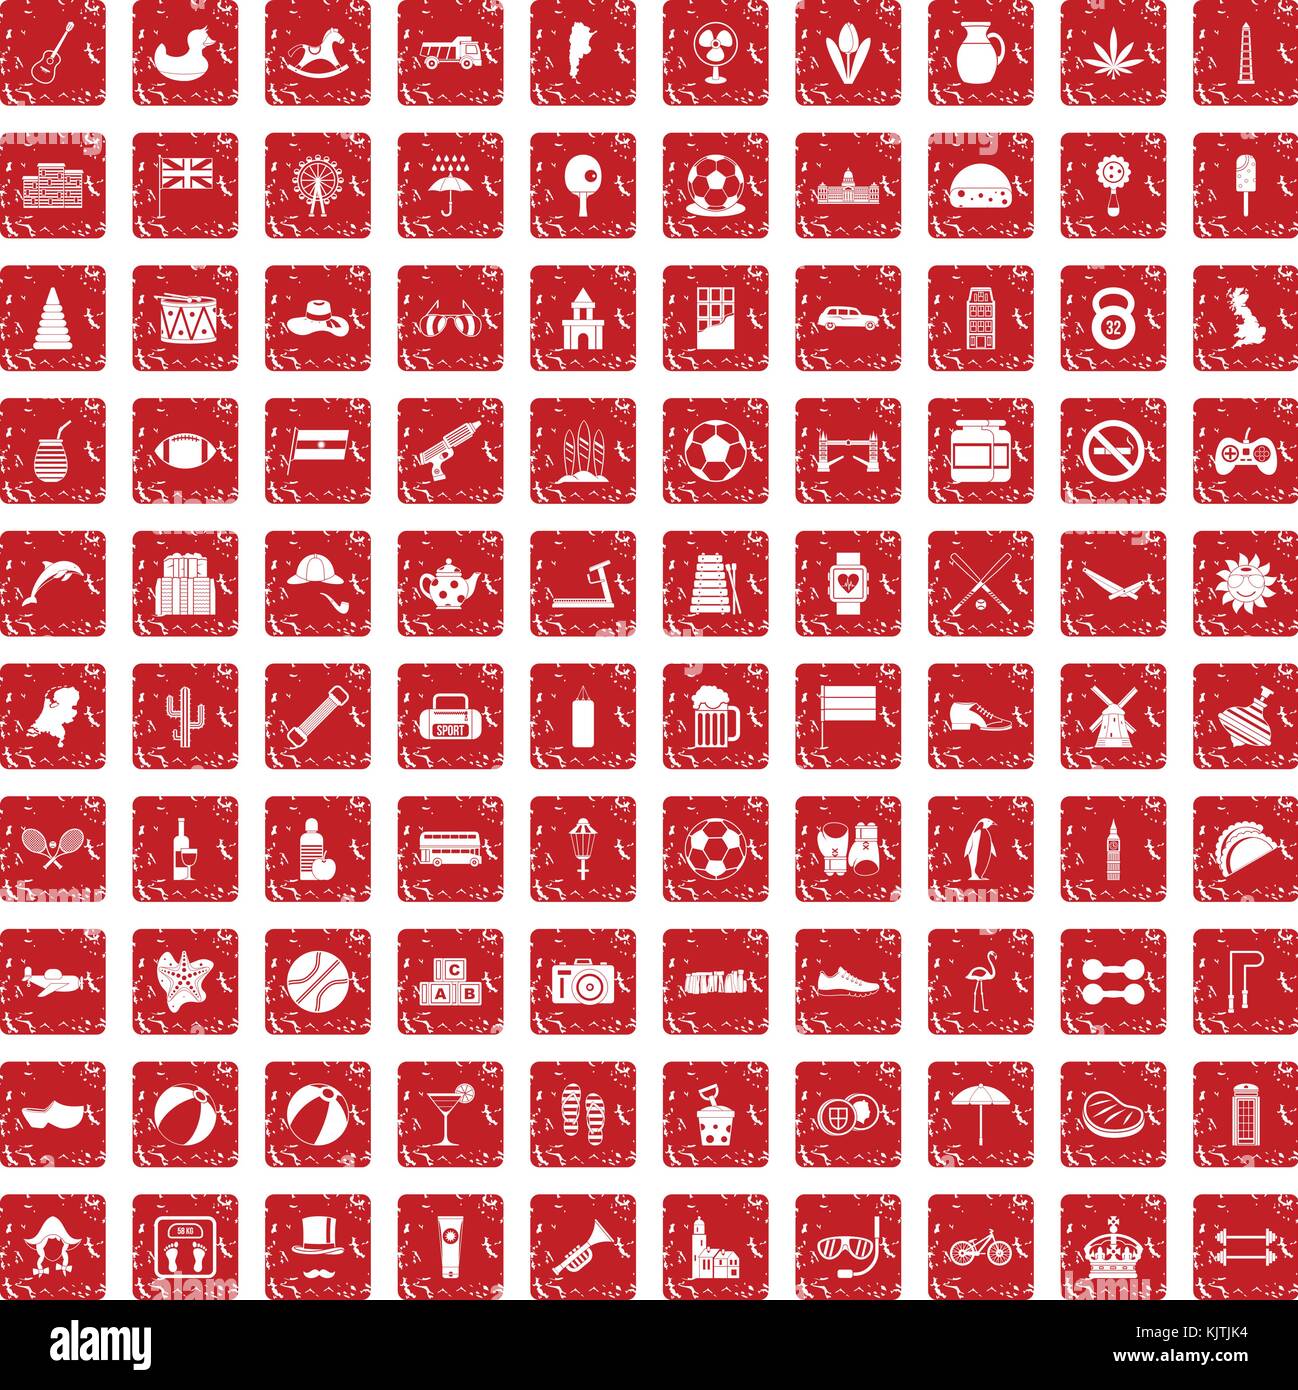 100 ball icons set grunge red Stock Vector